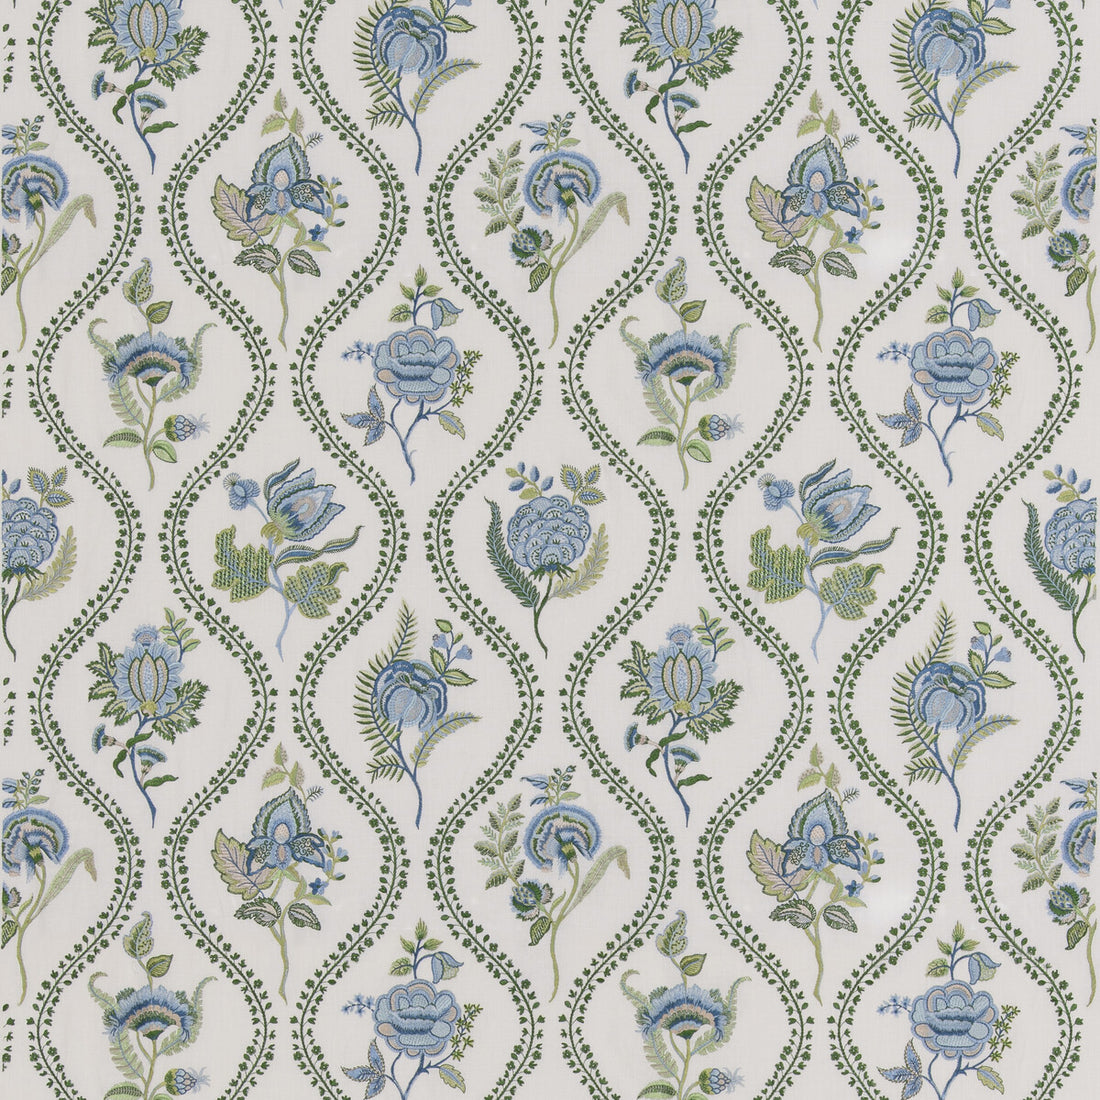 Burford Embroidery fabric in blue/emerald color - pattern BF11025.2.0 - by G P &amp; J Baker in the Burford collection